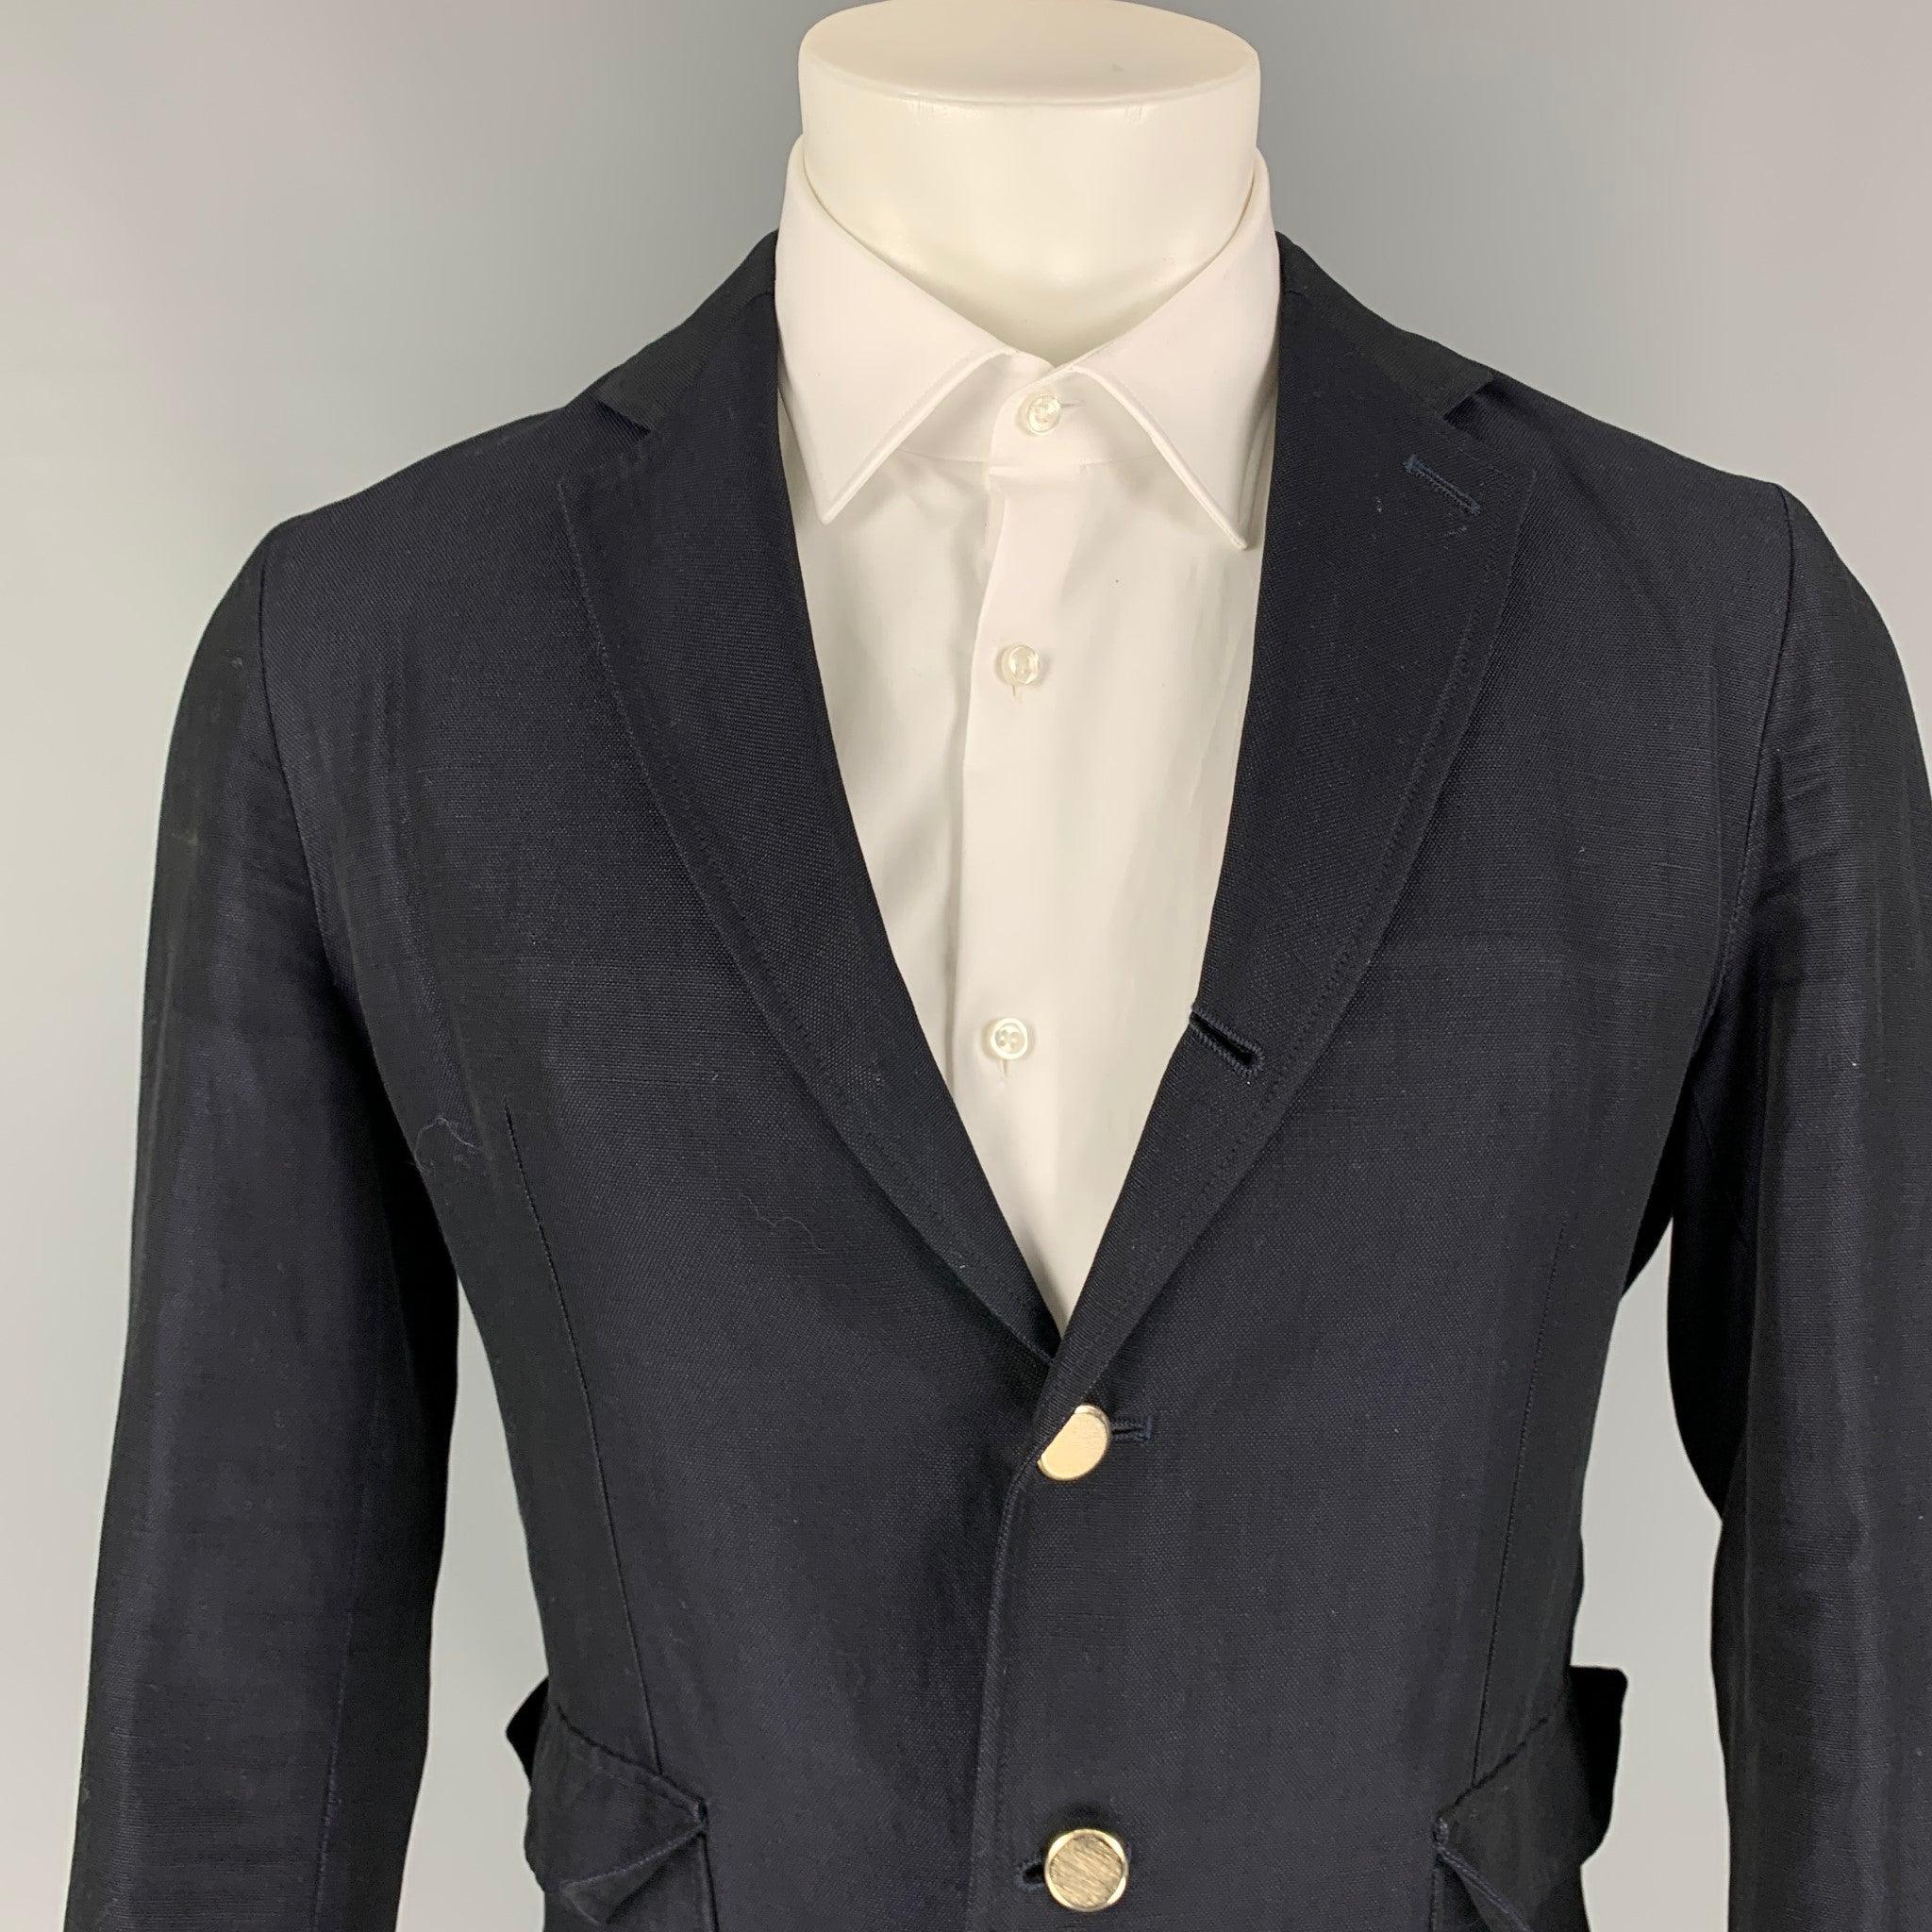 BAND OF OUTSIDERS sport coat comes in a navy cotton / linen with a half liner featuring a notch lapel, double back vent, patch pockets, and a three button closure. Made in Italy.
Good
Pre-Owned Condition. Minor wear throughout.  

Marked:   2